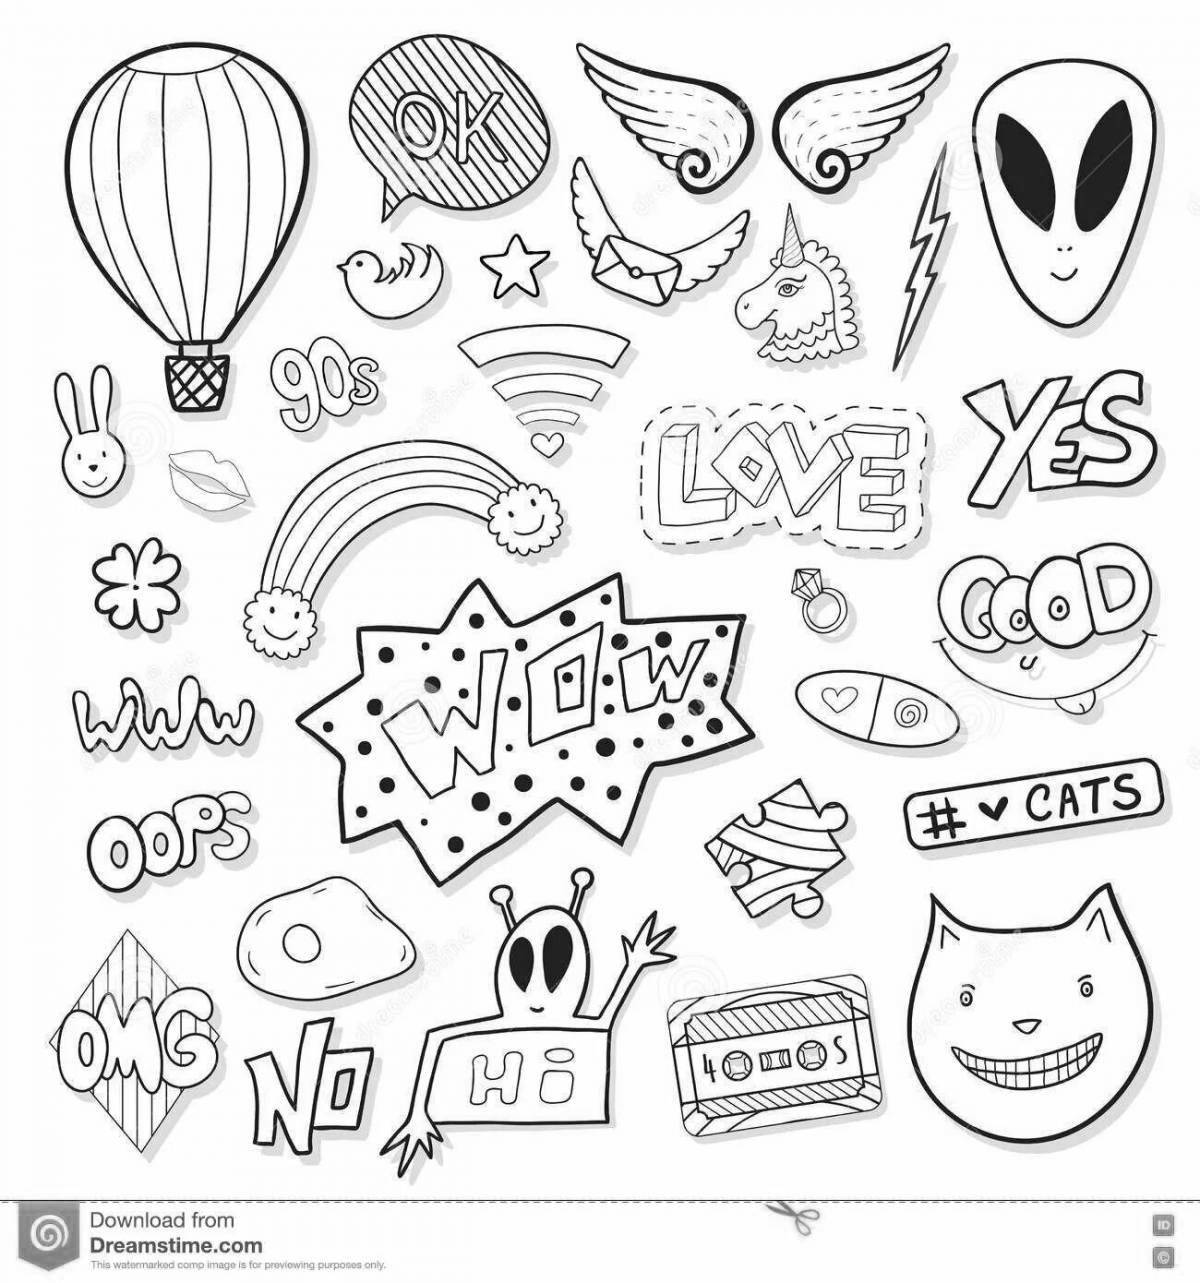 Gloss coloring stickers